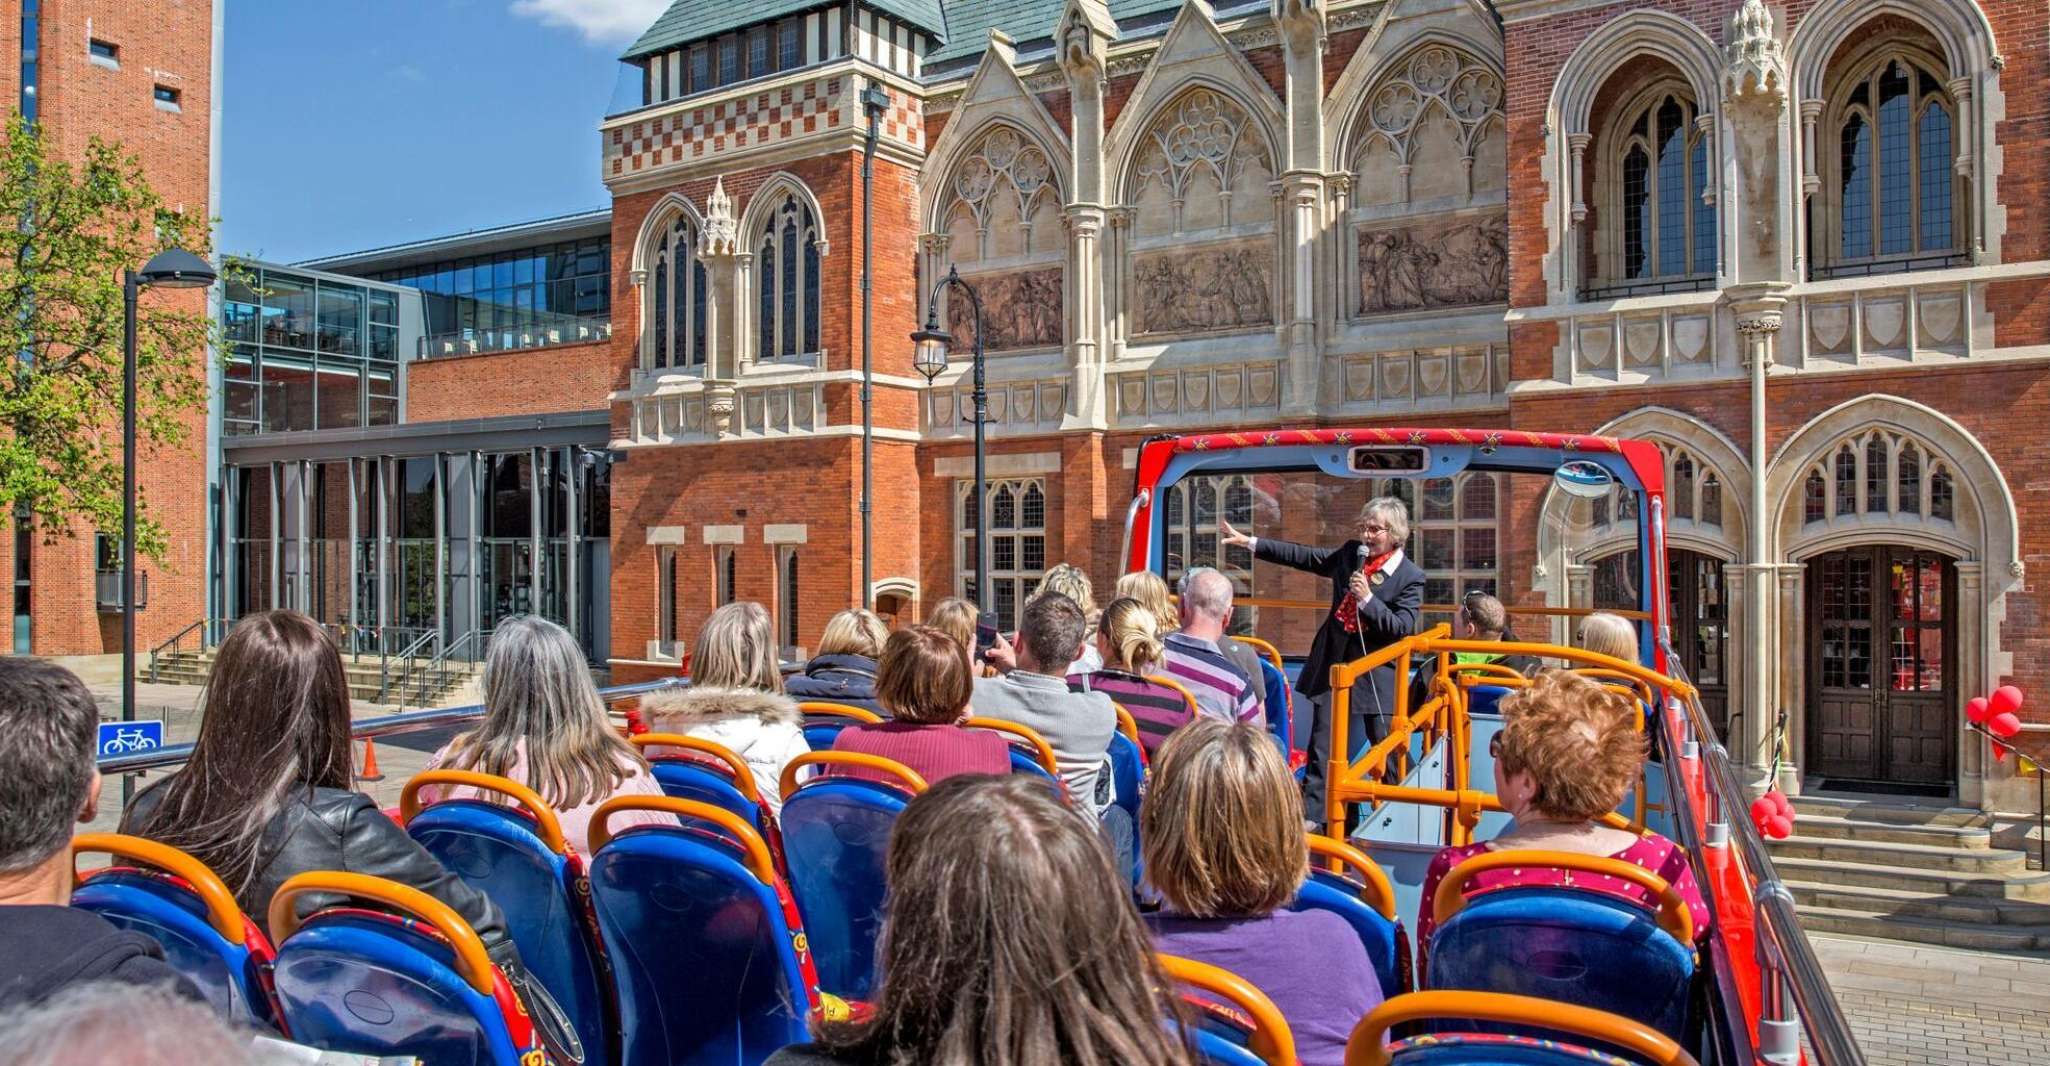 Stratford-upon-Avon,City Sightseeing Hop-On Hop-Off Bus Tour - Housity